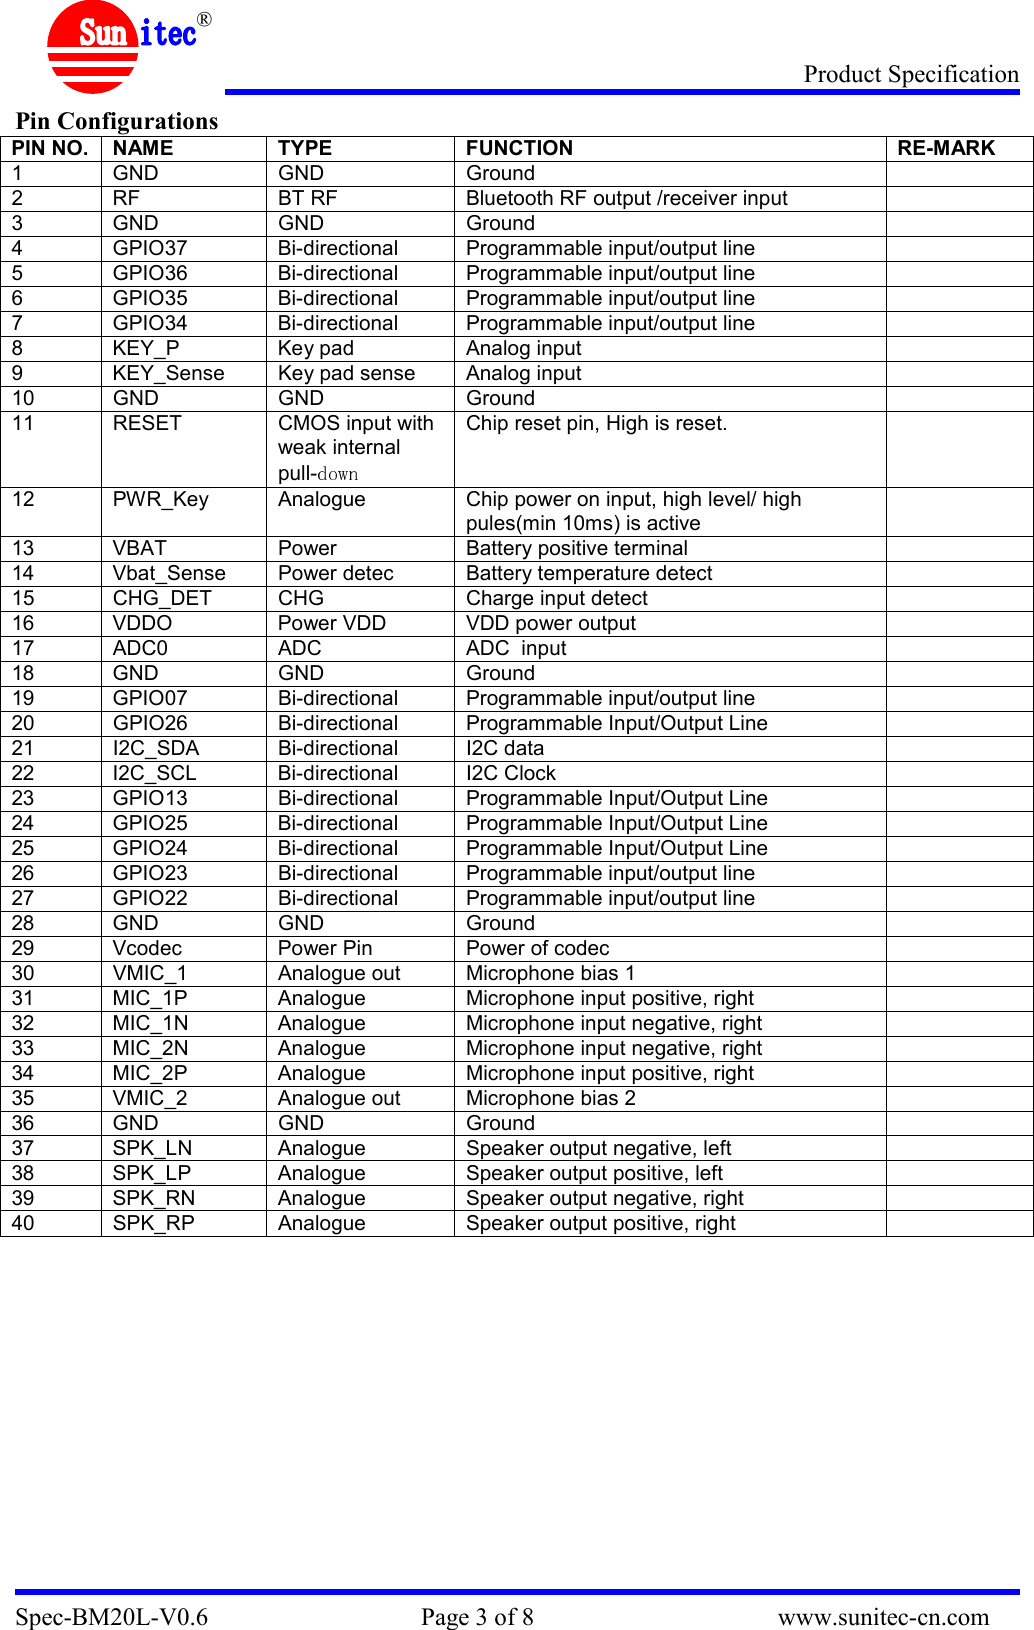 Product Specification Spec-BM20L-V0.6                                  Page 3 of 8                                       www.sunitec-cn.com  ® Pin Configurations PIN NO. NAME TYPE FUNCTION RE-MARK 1  GND  GND  Ground   2  RF  BT RF  Bluetooth RF output /receiver input   3  GND  GND  Ground   4  GPIO37  Bi-directional  Programmable input/output line   5  GPIO36  Bi-directional  Programmable input/output line   6  GPIO35  Bi-directional  Programmable input/output line   7  GPIO34  Bi-directional  Programmable input/output line   8  KEY_P  Key pad  Analog input   9  KEY_Sense  Key pad sense  Analog input   10  GND  GND  Ground   11  RESET  CMOS input with weak internal pull-  Chip reset pin, High is reset.   12  PWR_Key  Analogue  Chip power on input, high level/ high pules(min 10ms) is active  13  VBAT  Power  Battery positive terminal   14  Vbat_Sense  Power detec   Battery temperature detect   15  CHG_DET  CHG  Charge input detect   16  VDDO  Power VDD  VDD power output    17  ADC0  ADC  ADC  input   18  GND  GND  Ground   19  GPIO07  Bi-directional  Programmable input/output line   20  GPIO26  Bi-directional  Programmable Input/Output Line   21  I2C_SDA  Bi-directional  I2C data   22  I2C_SCL  Bi-directional  I2C Clock   23  GPIO13  Bi-directional  Programmable Input/Output Line   24  GPIO25  Bi-directional  Programmable Input/Output Line   25  GPIO24  Bi-directional  Programmable Input/Output Line   26  GPIO23  Bi-directional  Programmable input/output line   27  GPIO22  Bi-directional  Programmable input/output line   28  GND  GND  Ground   29  Vcodec  Power Pin  Power of codec   30  VMIC_1  Analogue out  Microphone bias 1   31  MIC_1P  Analogue  Microphone input positive, right   32  MIC_1N  Analogue  Microphone input negative, right   33  MIC_2N  Analogue  Microphone input negative, right   34  MIC_2P  Analogue  Microphone input positive, right   35  VMIC_2  Analogue out  Microphone bias 2   36  GND  GND  Ground   37  SPK_LN  Analogue  Speaker output negative, left   38  SPK_LP  Analogue  Speaker output positive, left   39  SPK_RN  Analogue  Speaker output negative, right   40  SPK_RP  Analogue  Speaker output positive, right                  